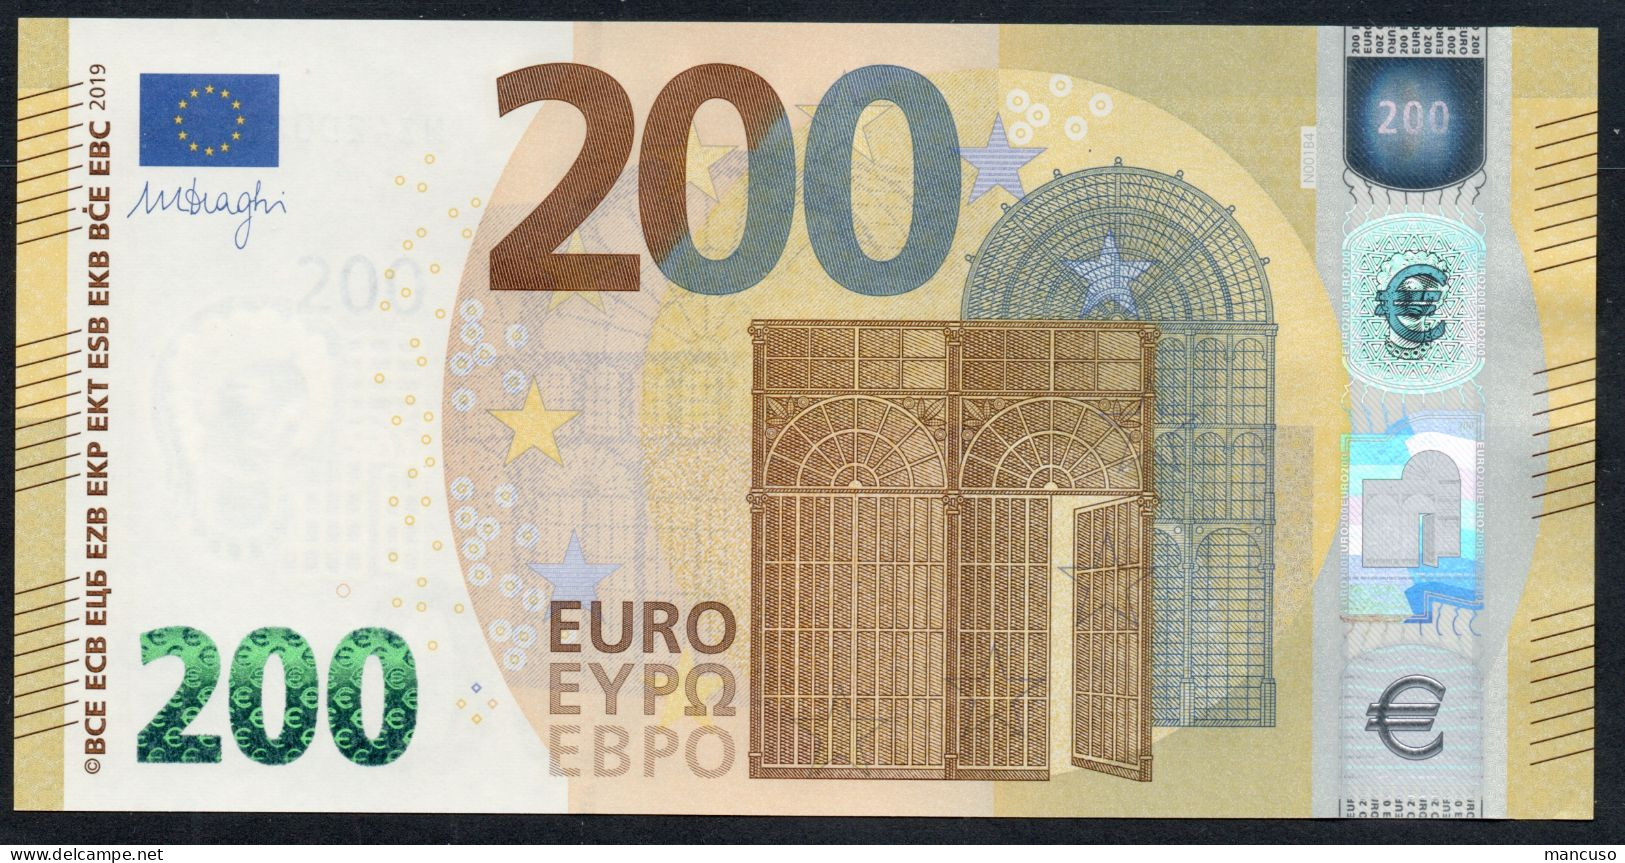 € 200  AUSTRIA  NZ (Testnote)  N001  ALL EVEN NUMBERS - DRAGHI  UNC - 200 Euro